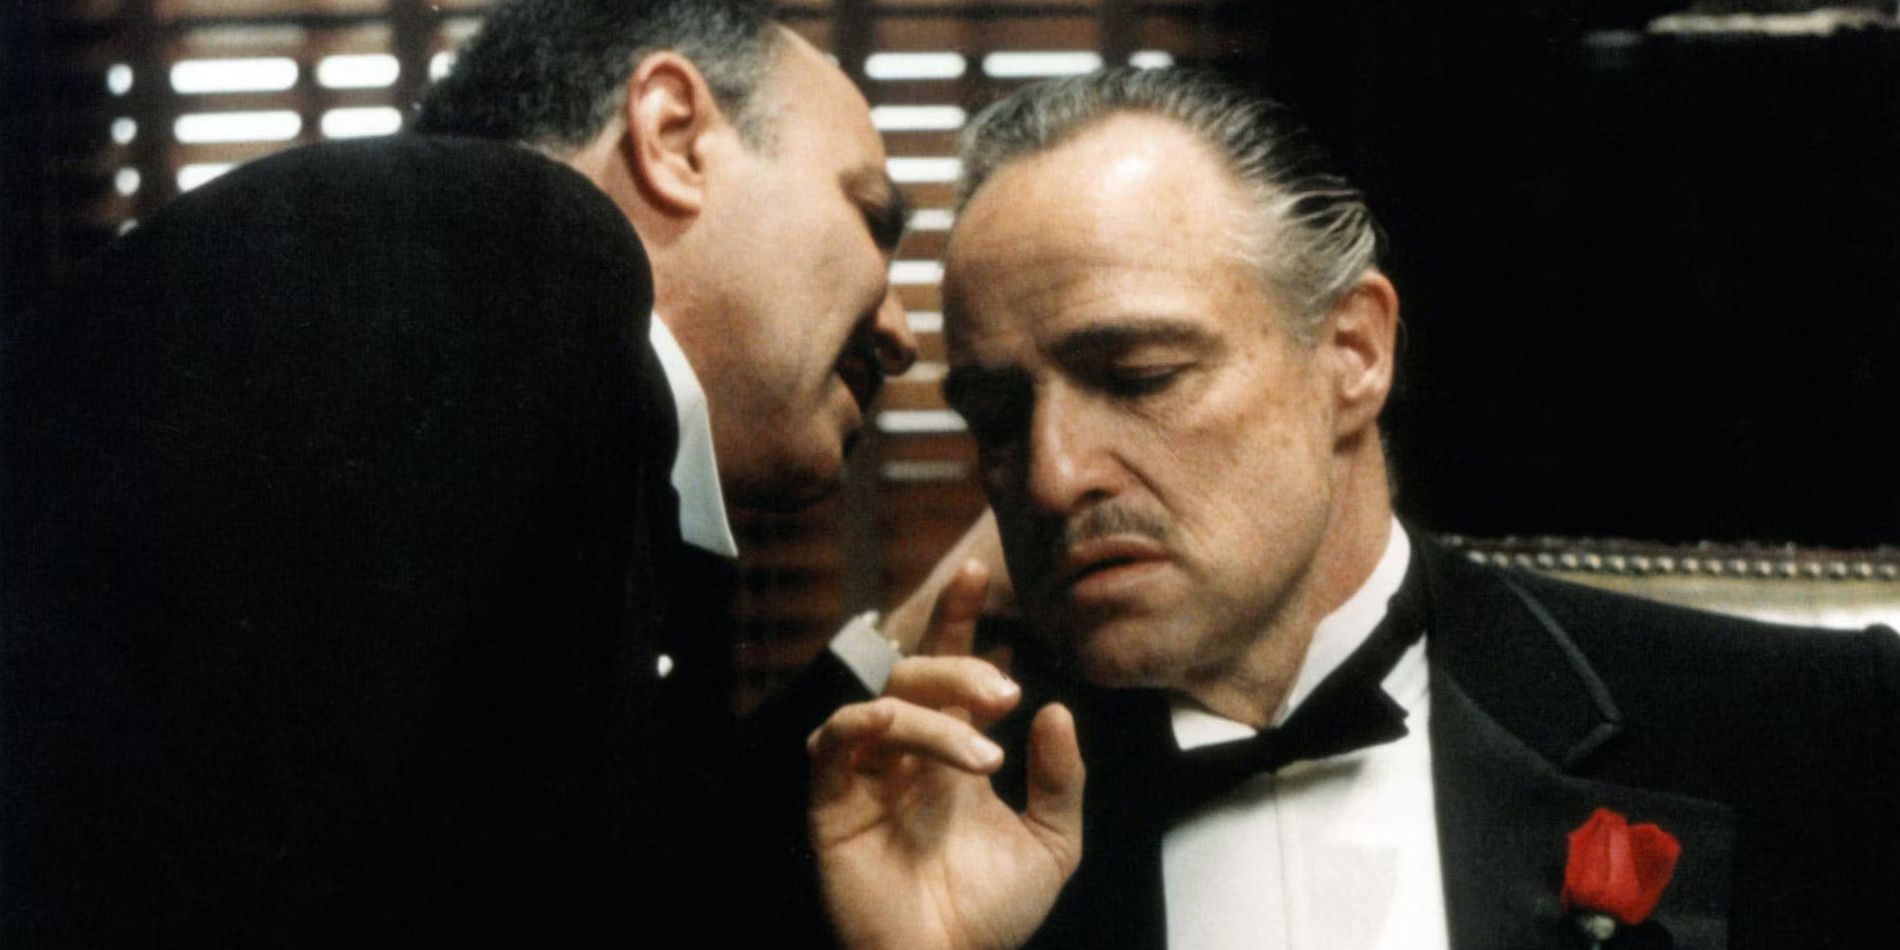 Bonasera whispers to Don Corleone as he sits in his chair